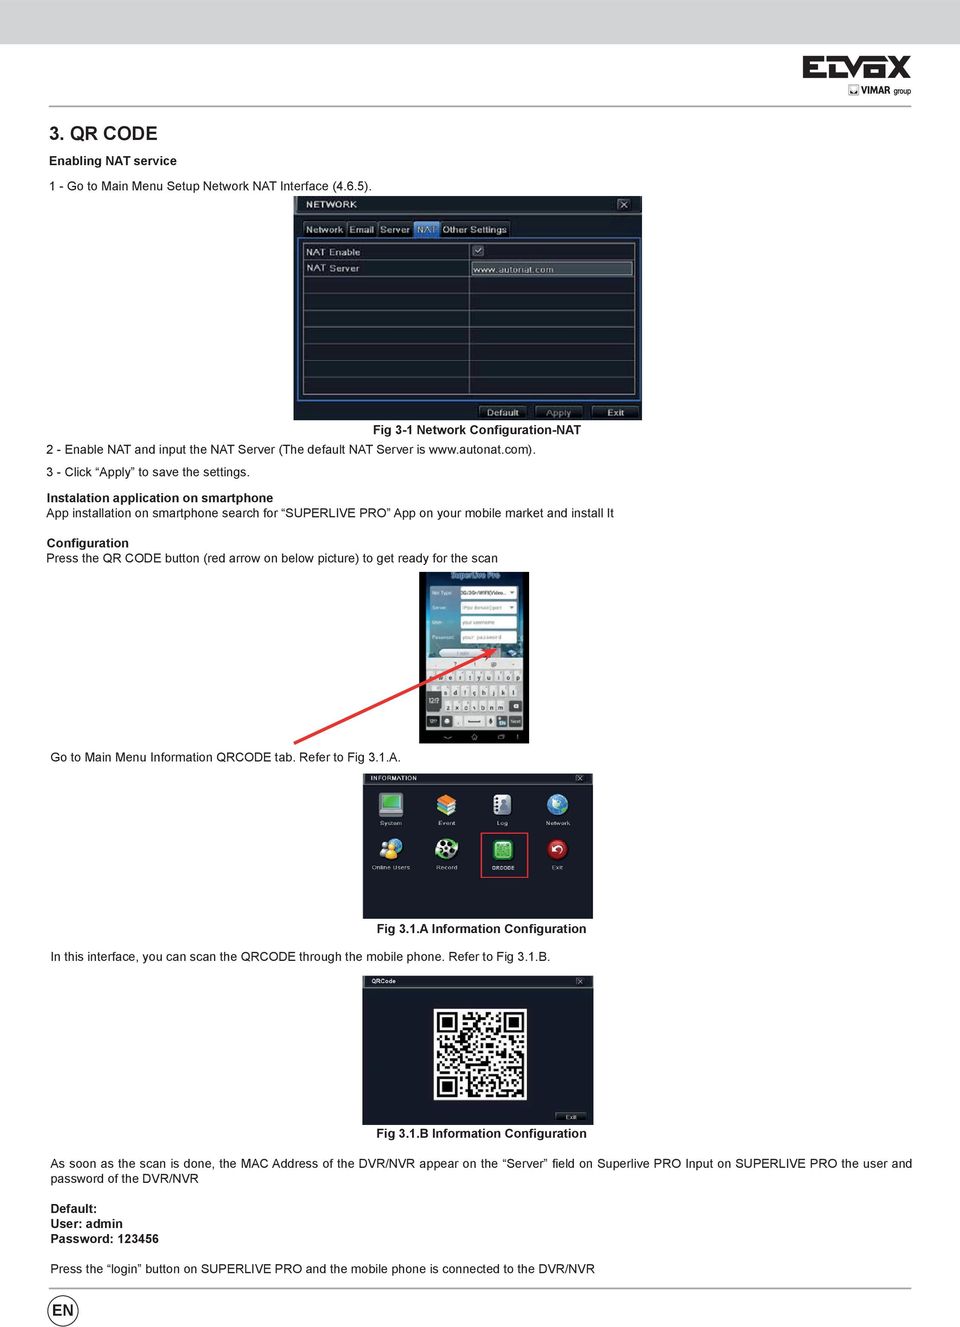 Instalation application on smartphone App installation on smartphone search for SUPERLIVE PRO App on your mobile market and install It Configuration Press the QR CODE button (red arrow on below